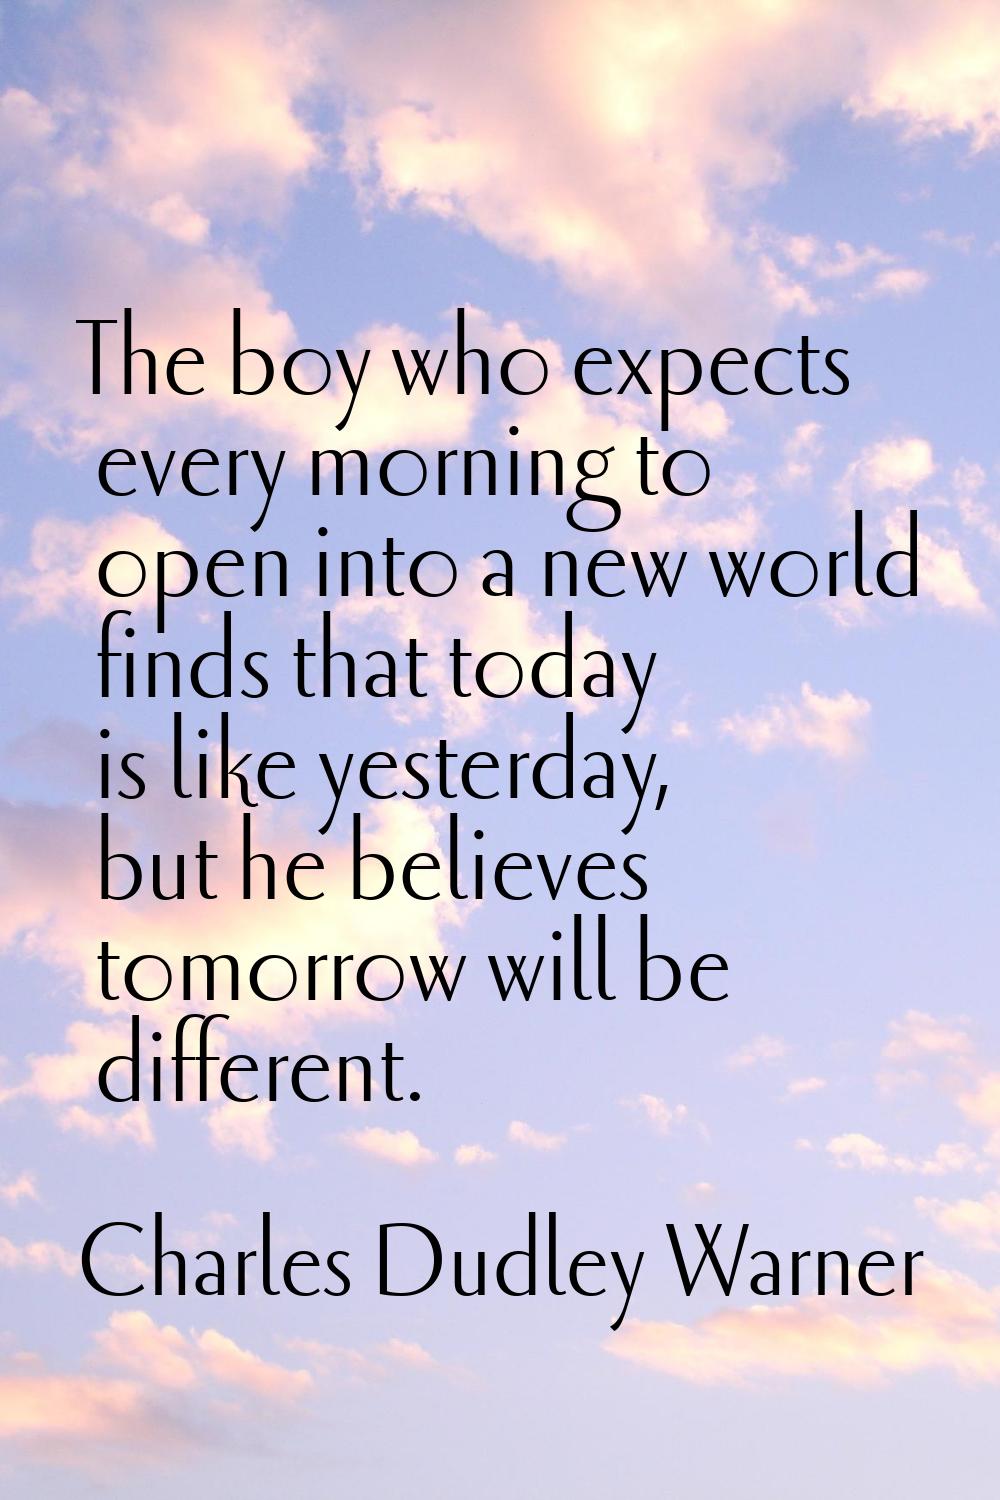 The boy who expects every morning to open into a new world finds that today is like yesterday, but 